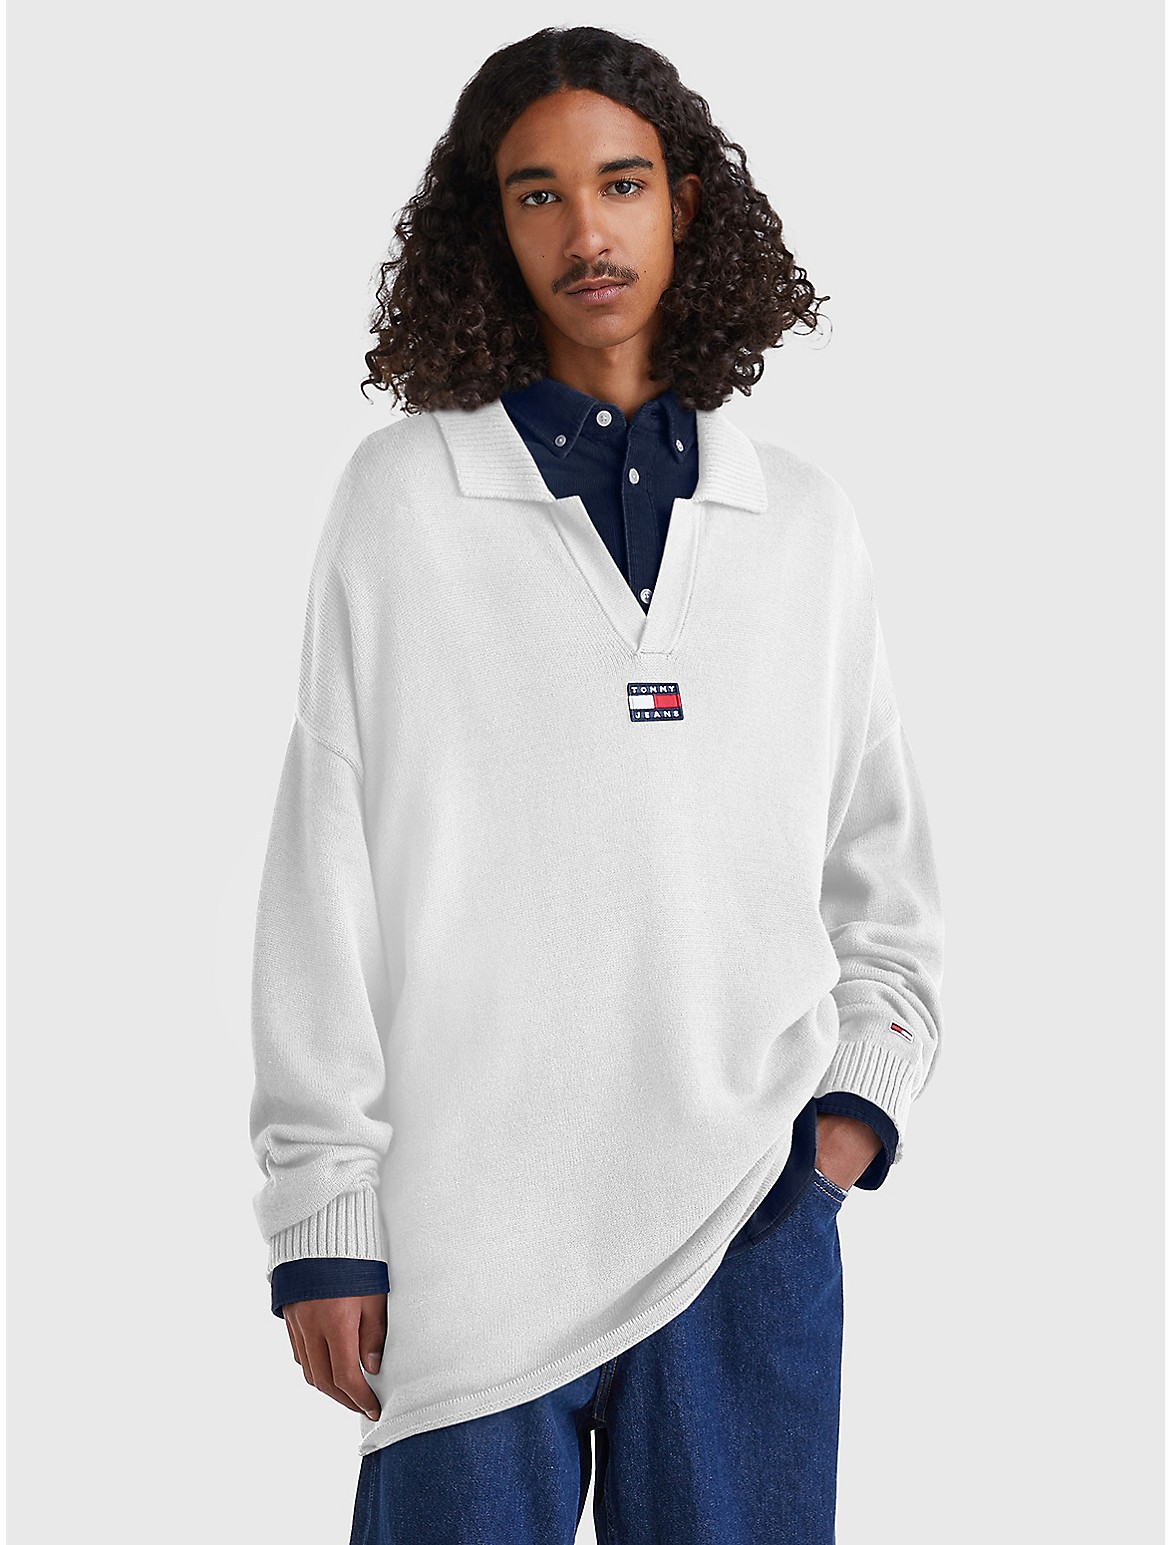 Tommy Hilfiger Men's Skater Long-Sleeve Polo Sweater